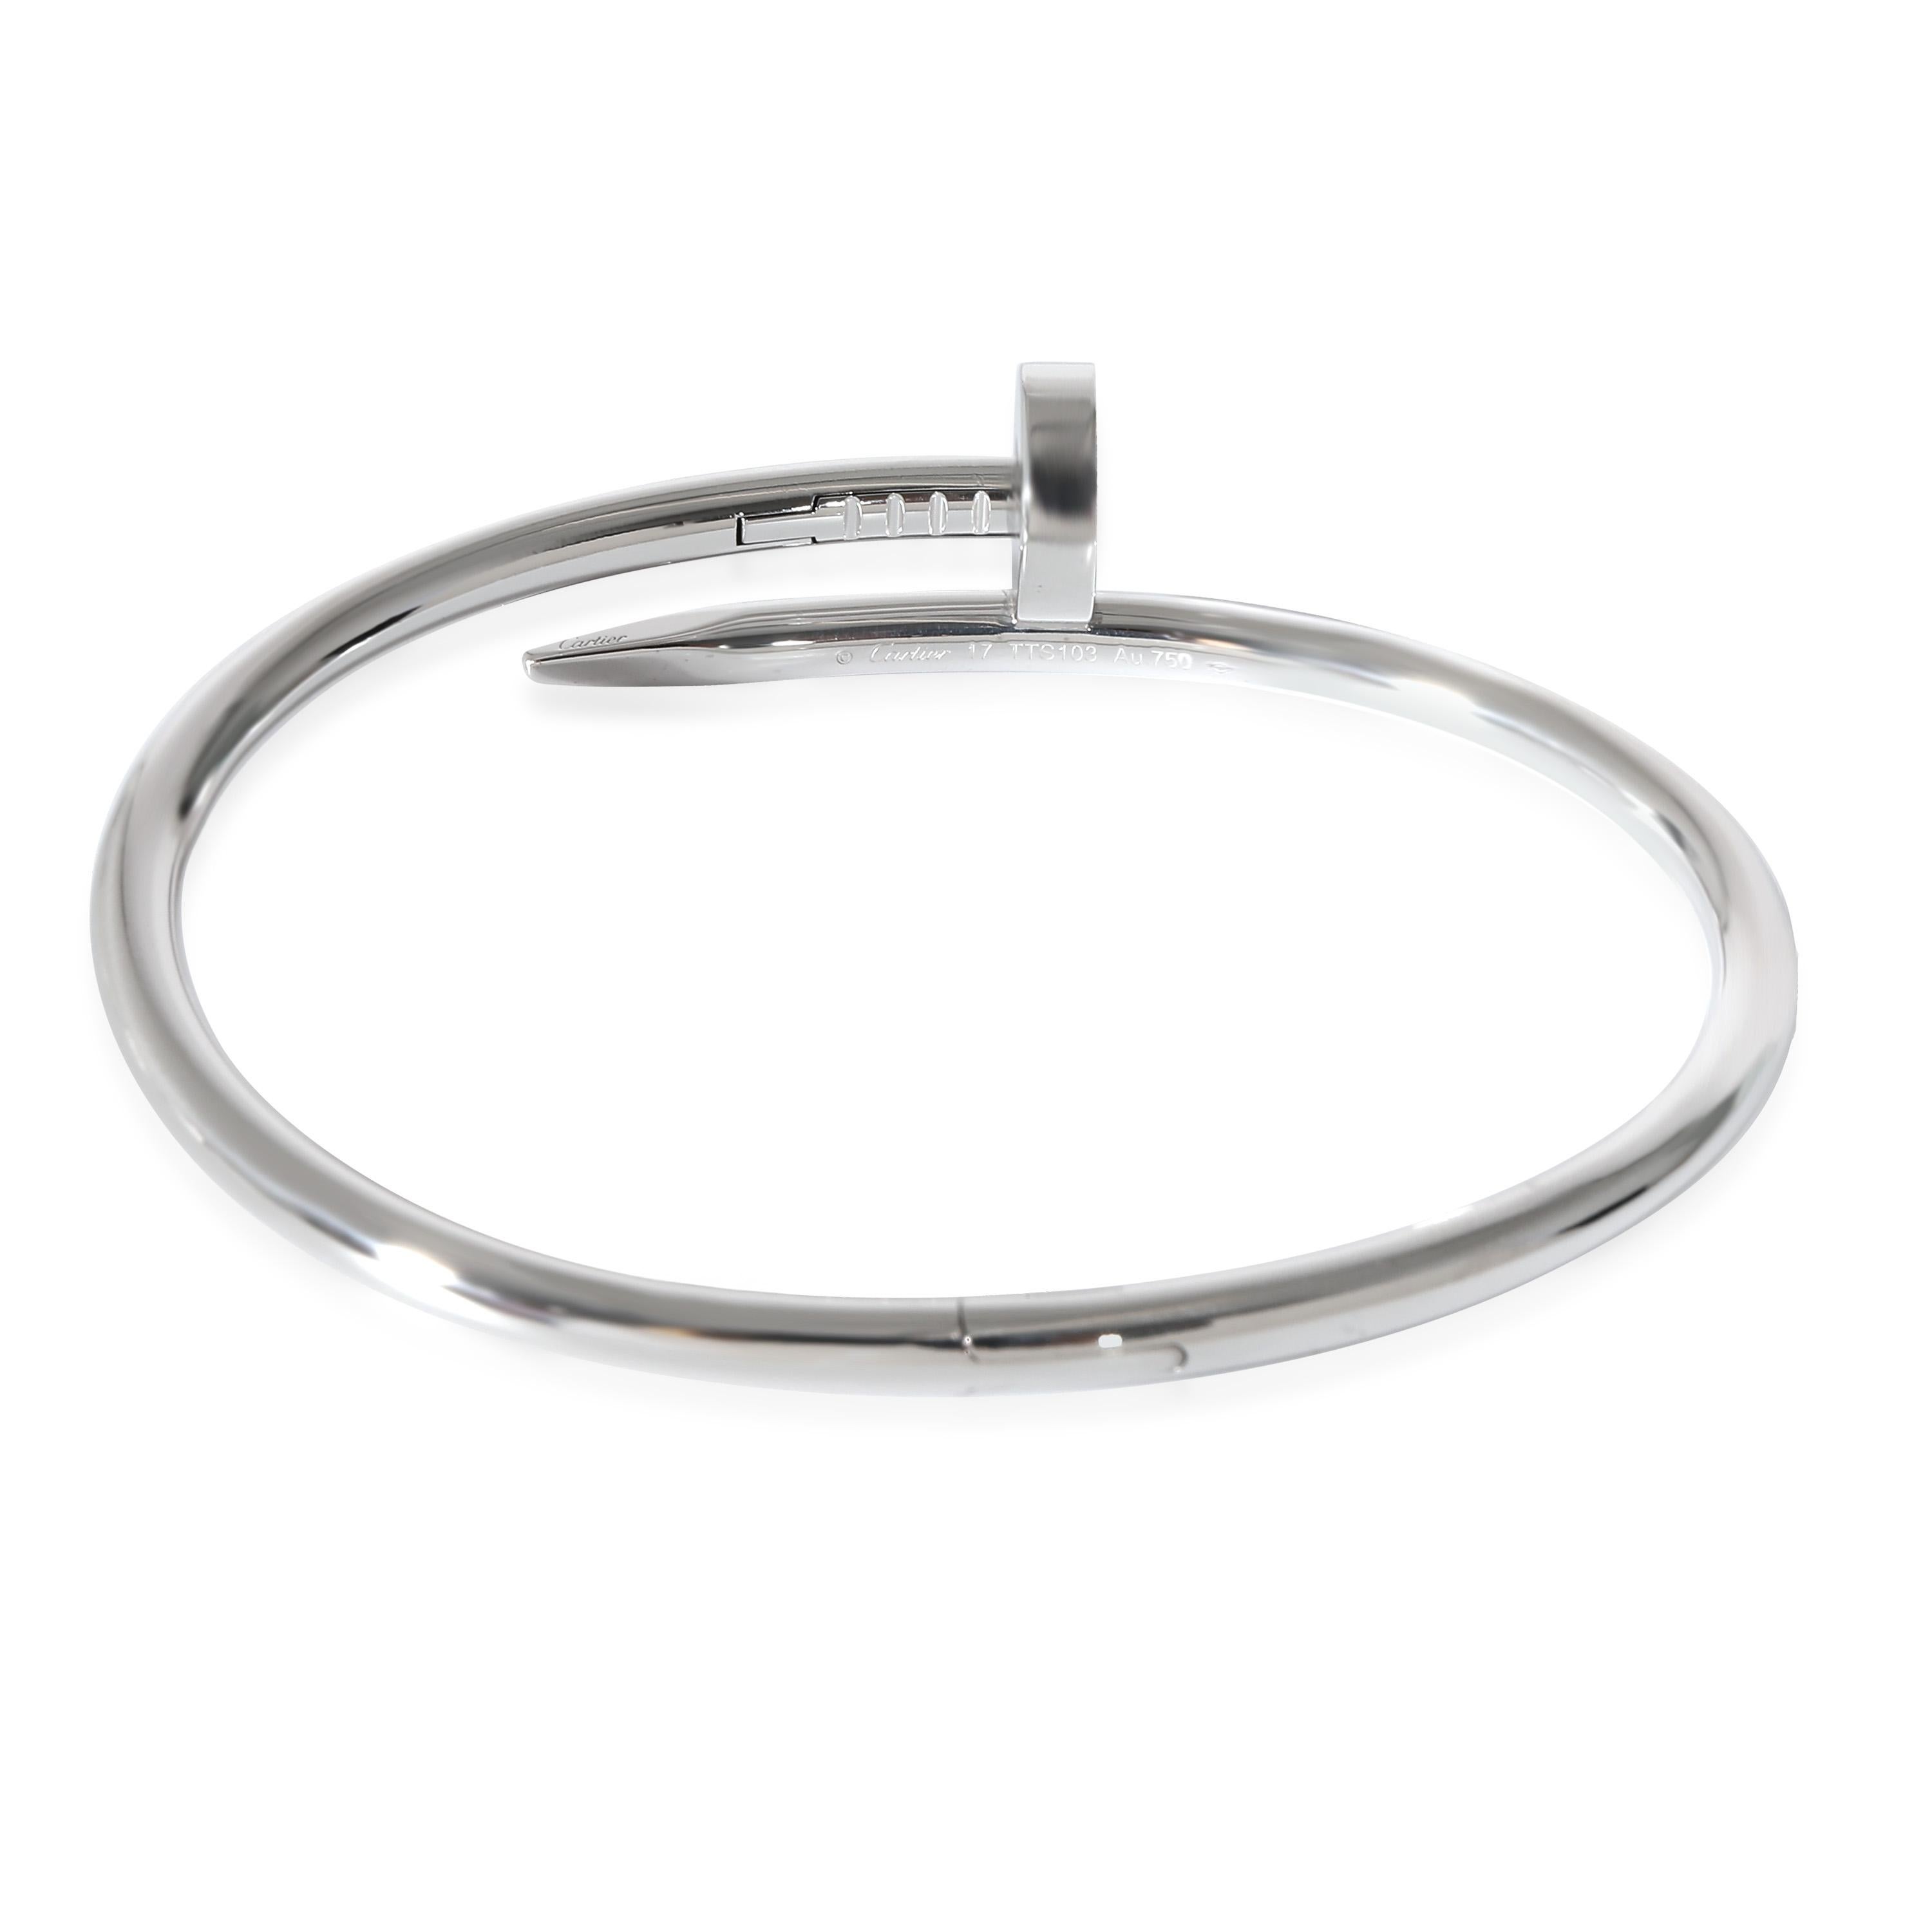 Cartier Juste Un Clou Bracelet in 18 KT White Gold

PRIMARY DETAILS
SKU: 134664
Listing Title: Cartier Juste Un Clou Bracelet in 18 KT White Gold
Condition Description: Translating to 'just a nail', the Juste Un Clou collection from Cartier is one